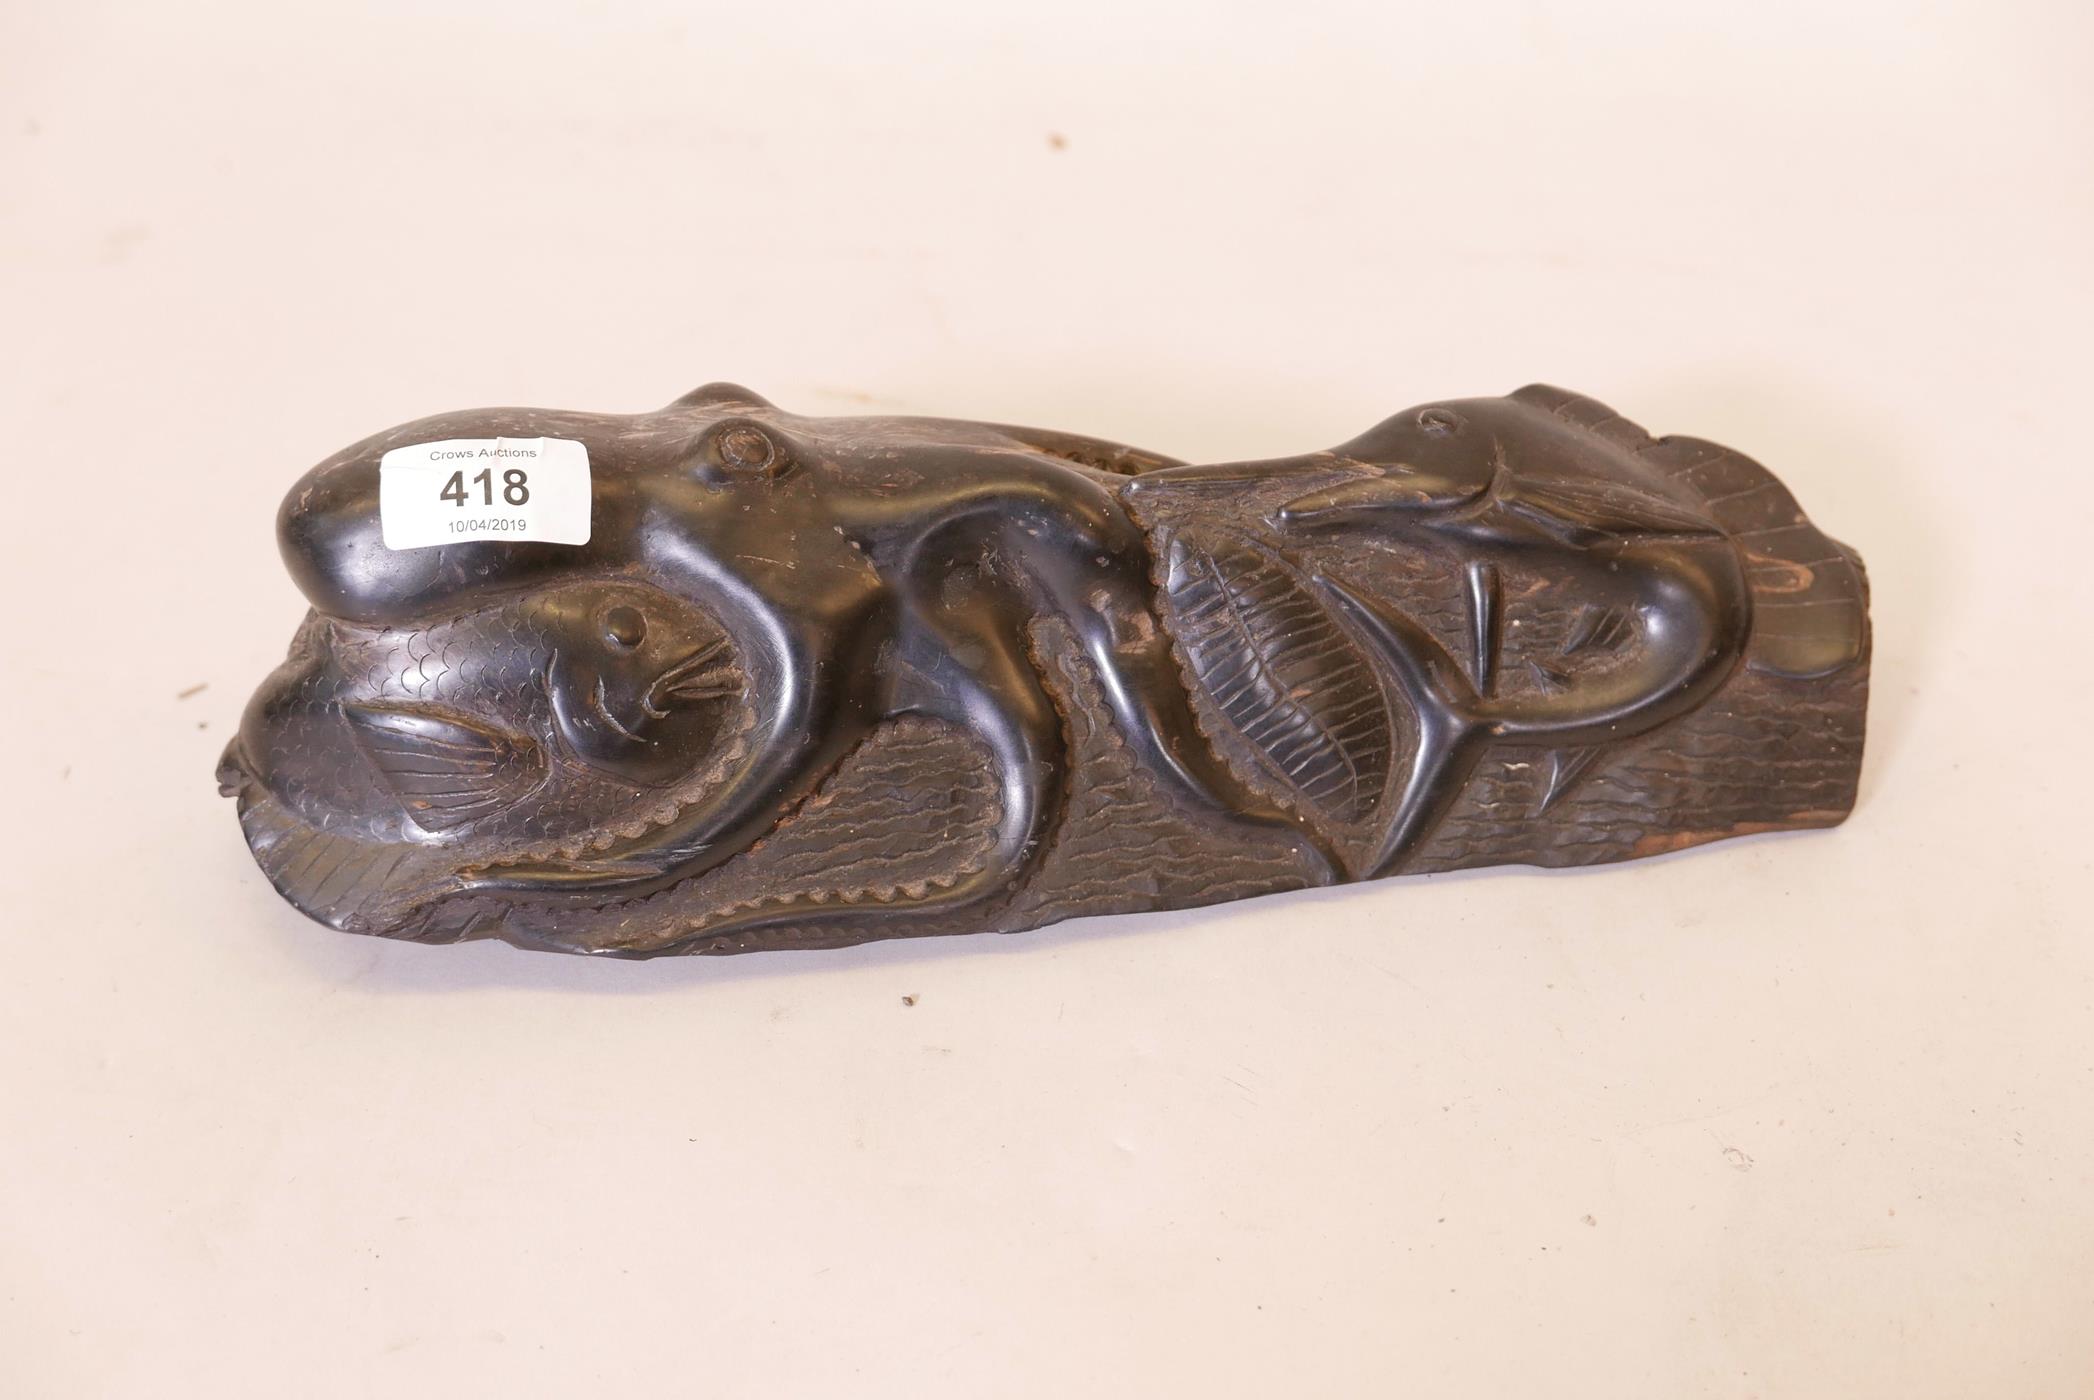 An ebony wood carving of an octopus and swordfish, 13" long